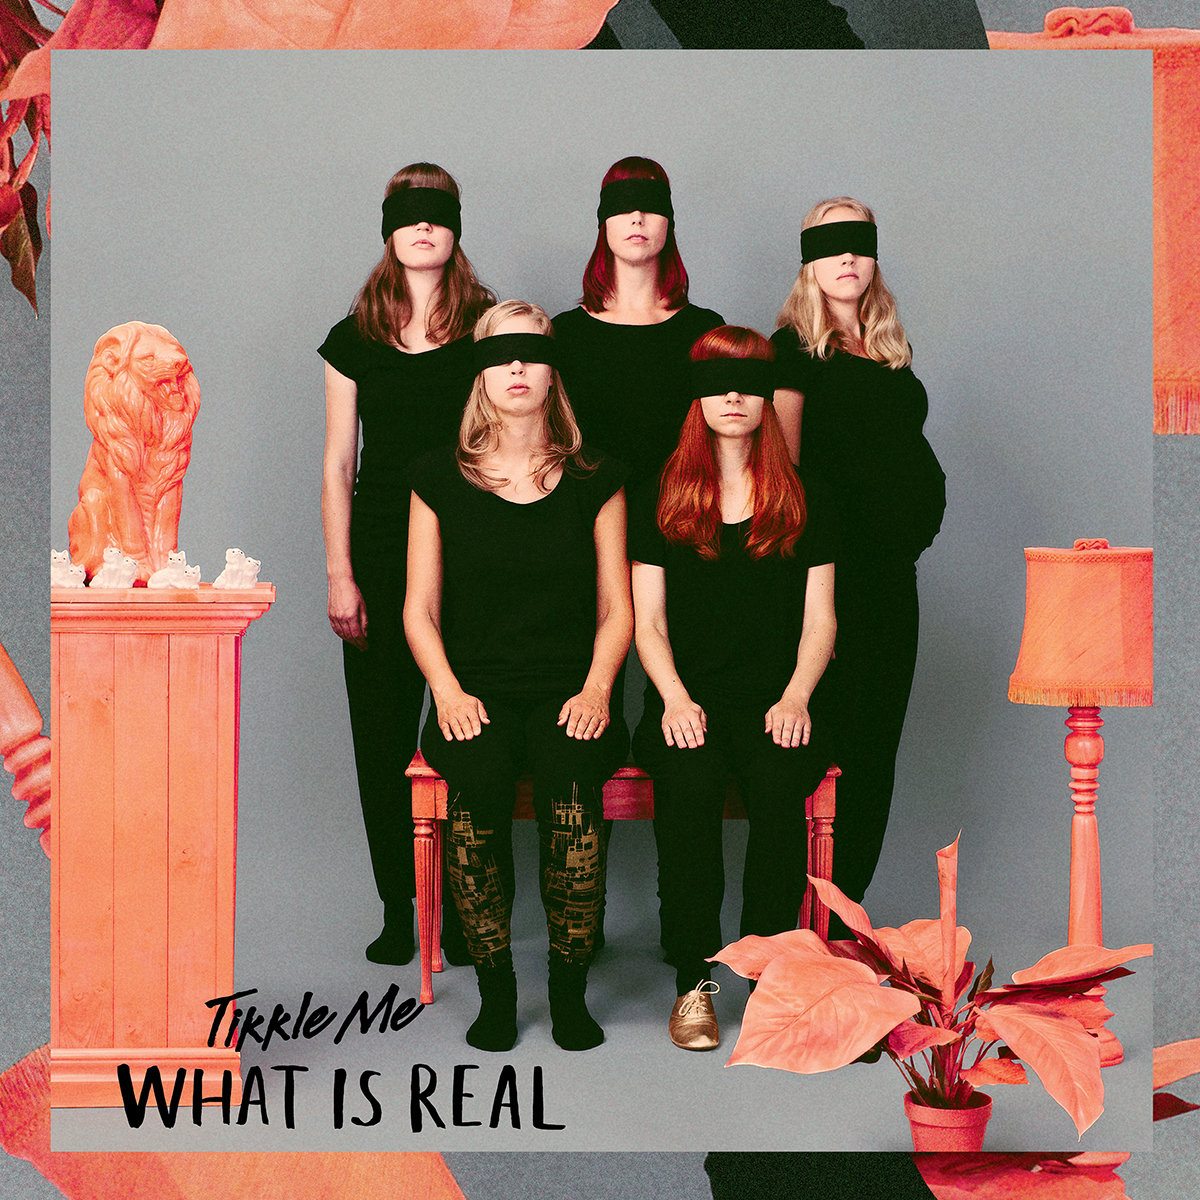 THE ALBUM COVER OF WHAT IS REAL BY TIKKLE ME.